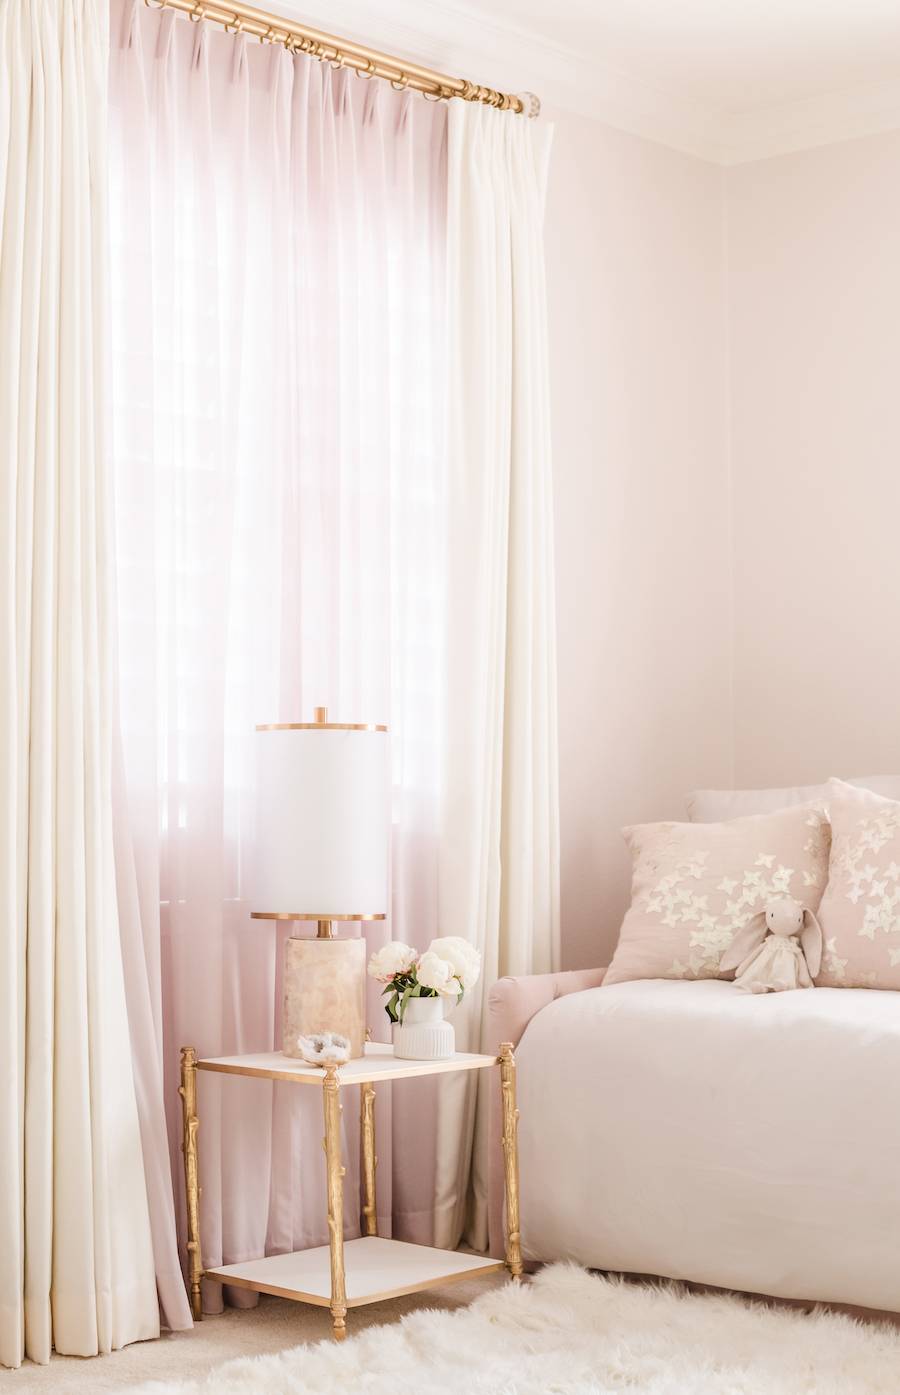 Custom Blackout Curtains and Daybed in Mauve Nursery